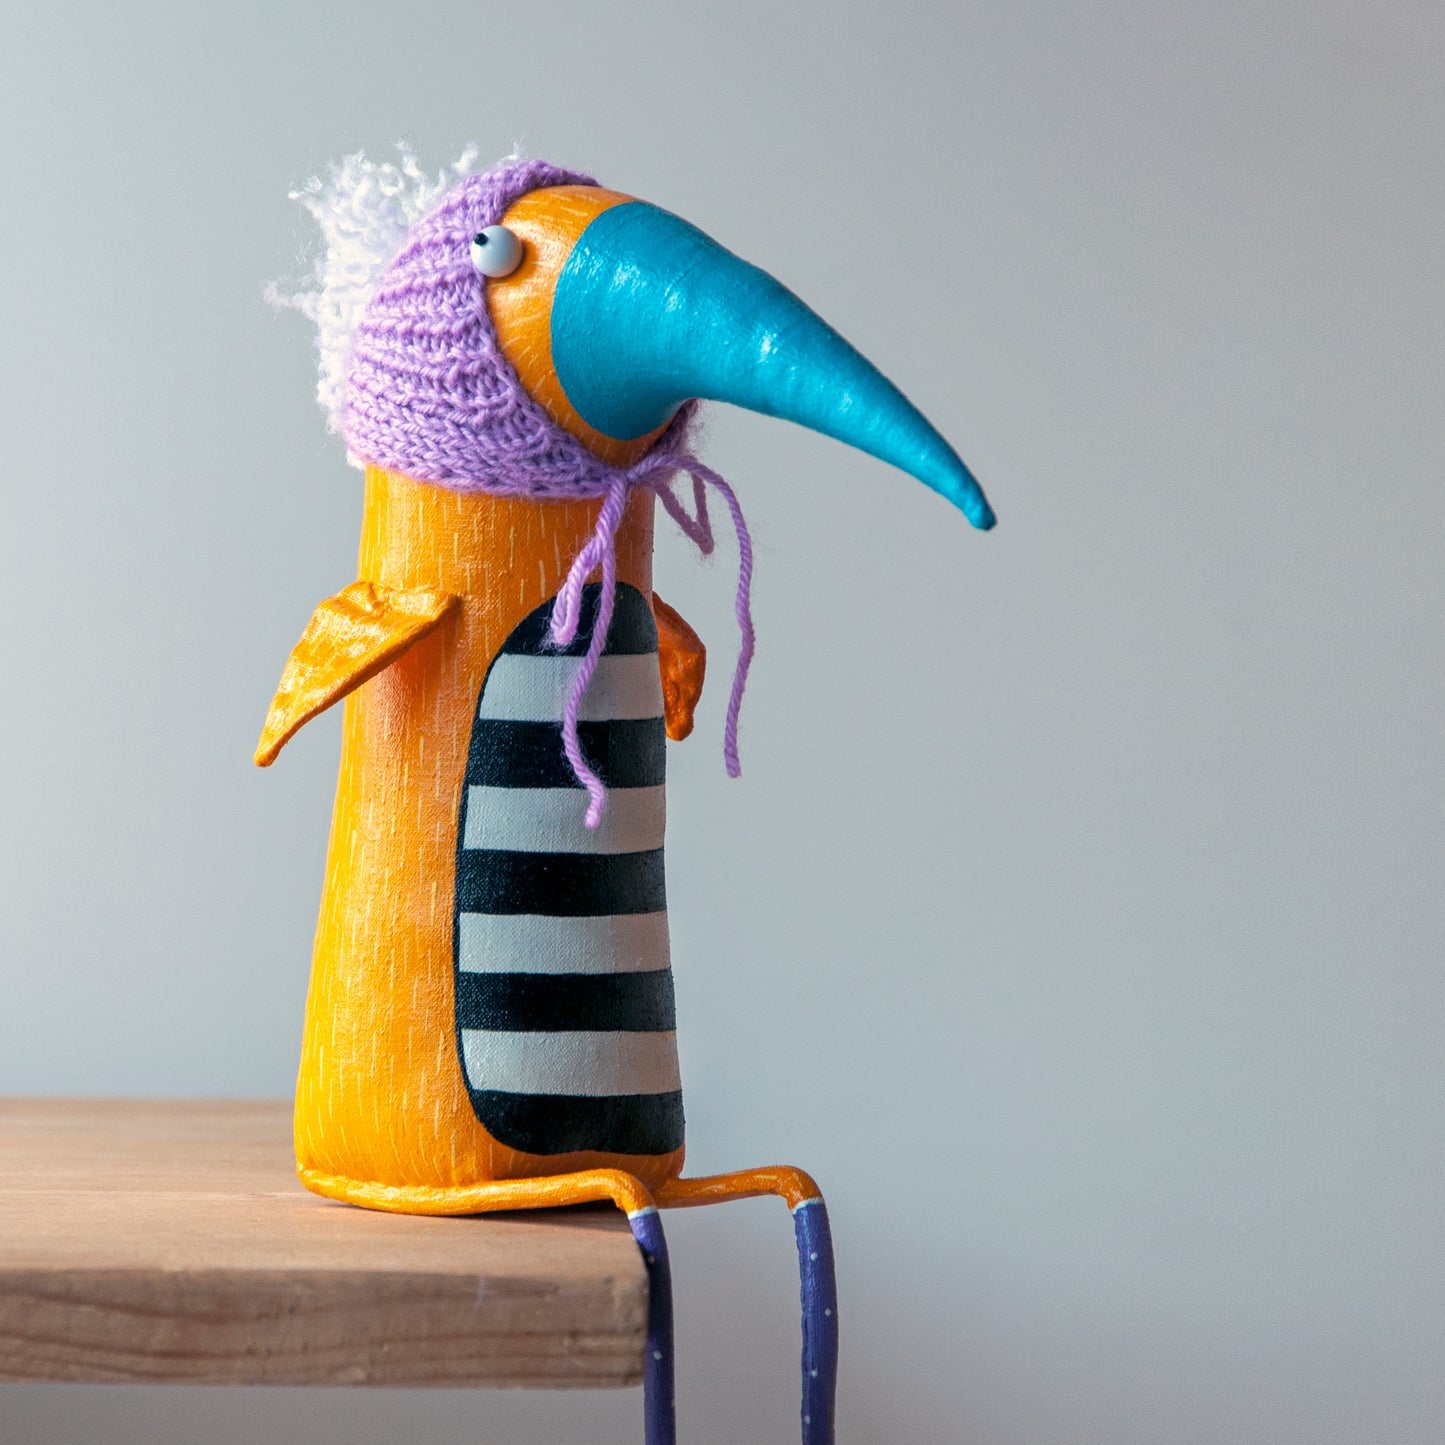 Yellow Bird in the knitted hat, interior toy